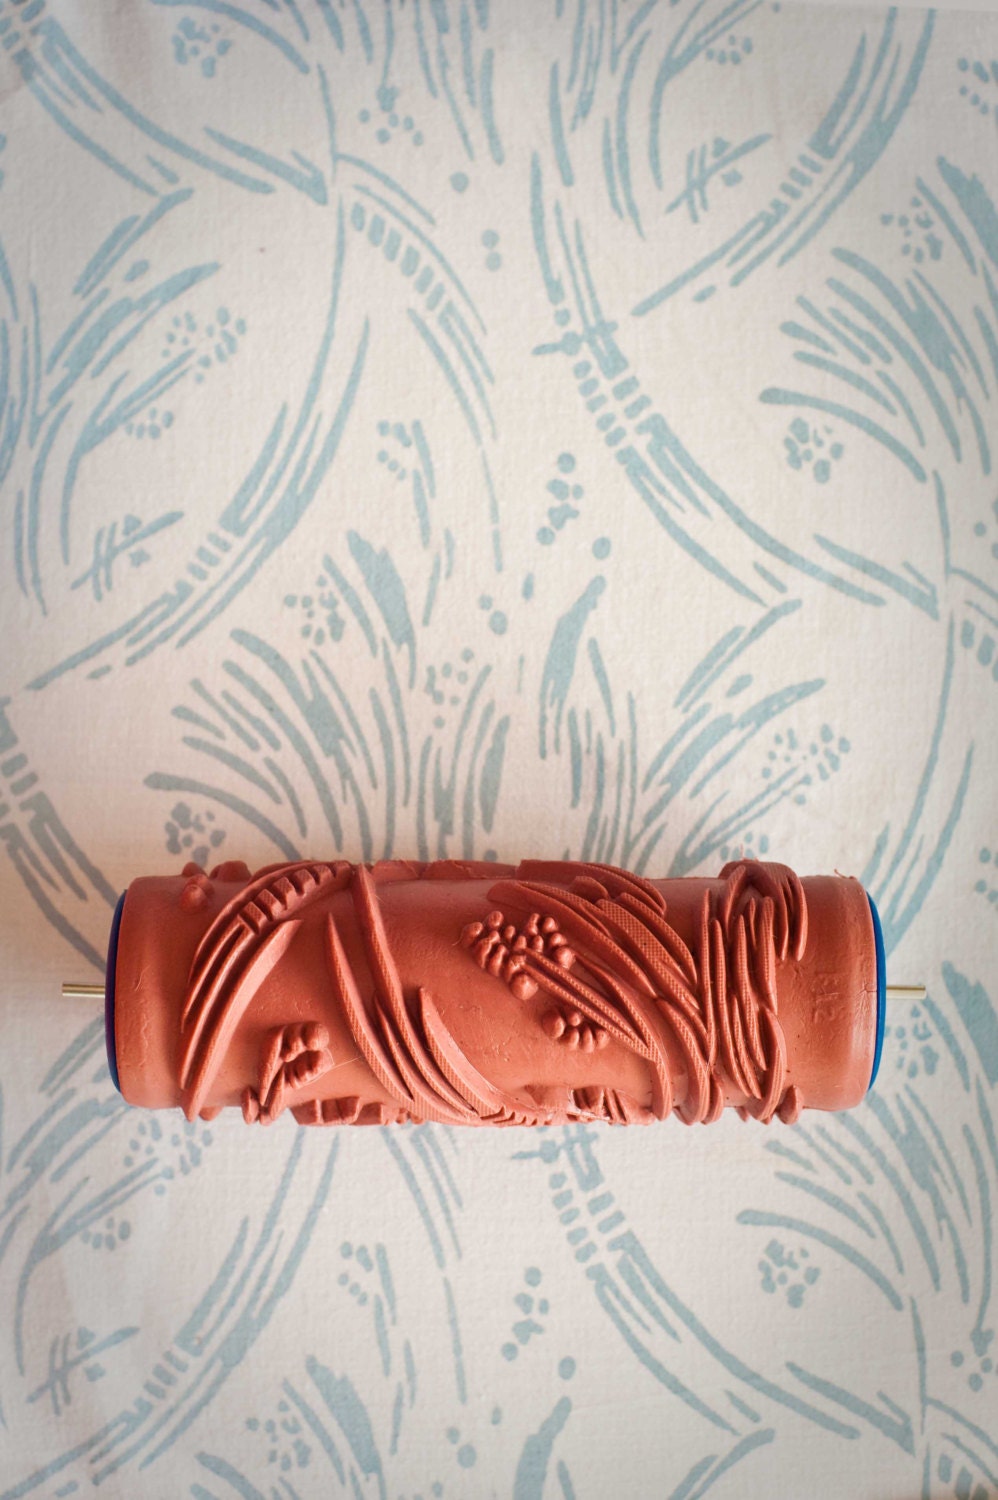 No. 3 Patterned Paint Roller from The Painted House